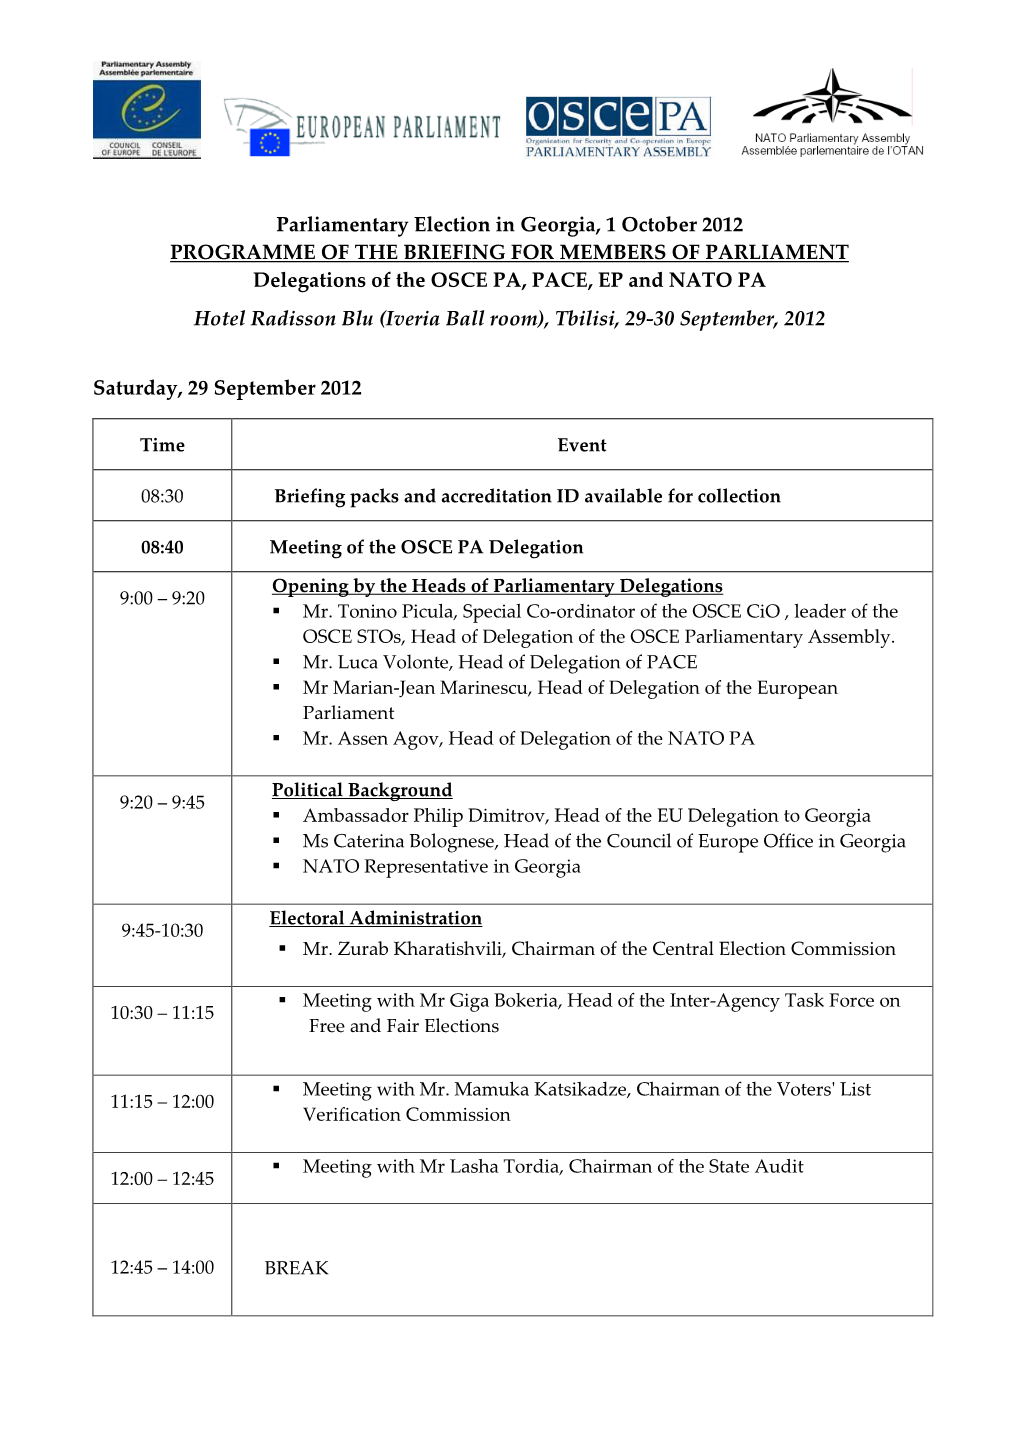 Parliamentary Election in Georgia, 1 October 2012 PROGRAMME OF